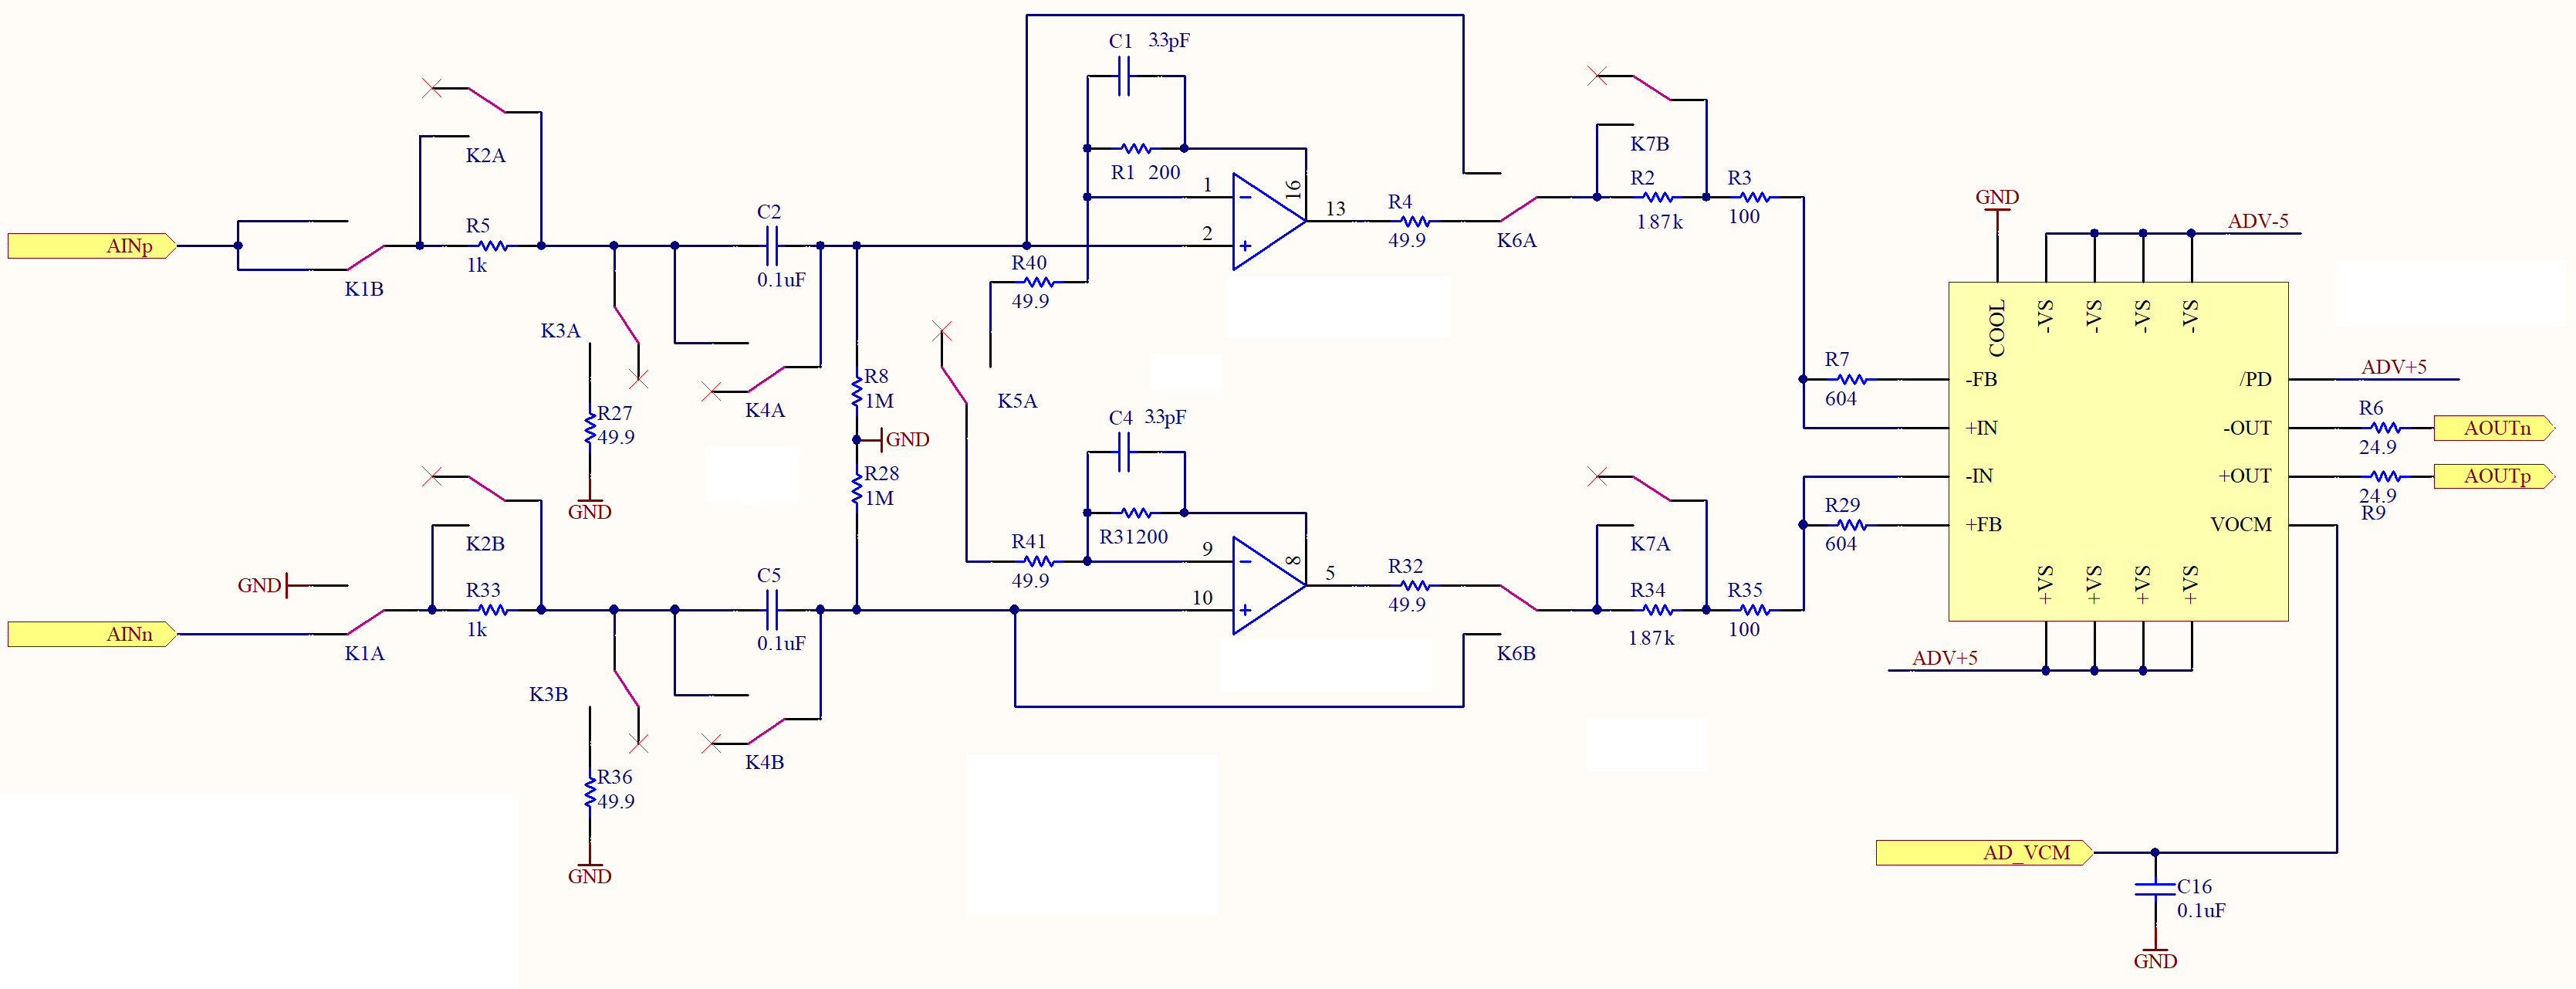 _images/mla3_input_schematic.png